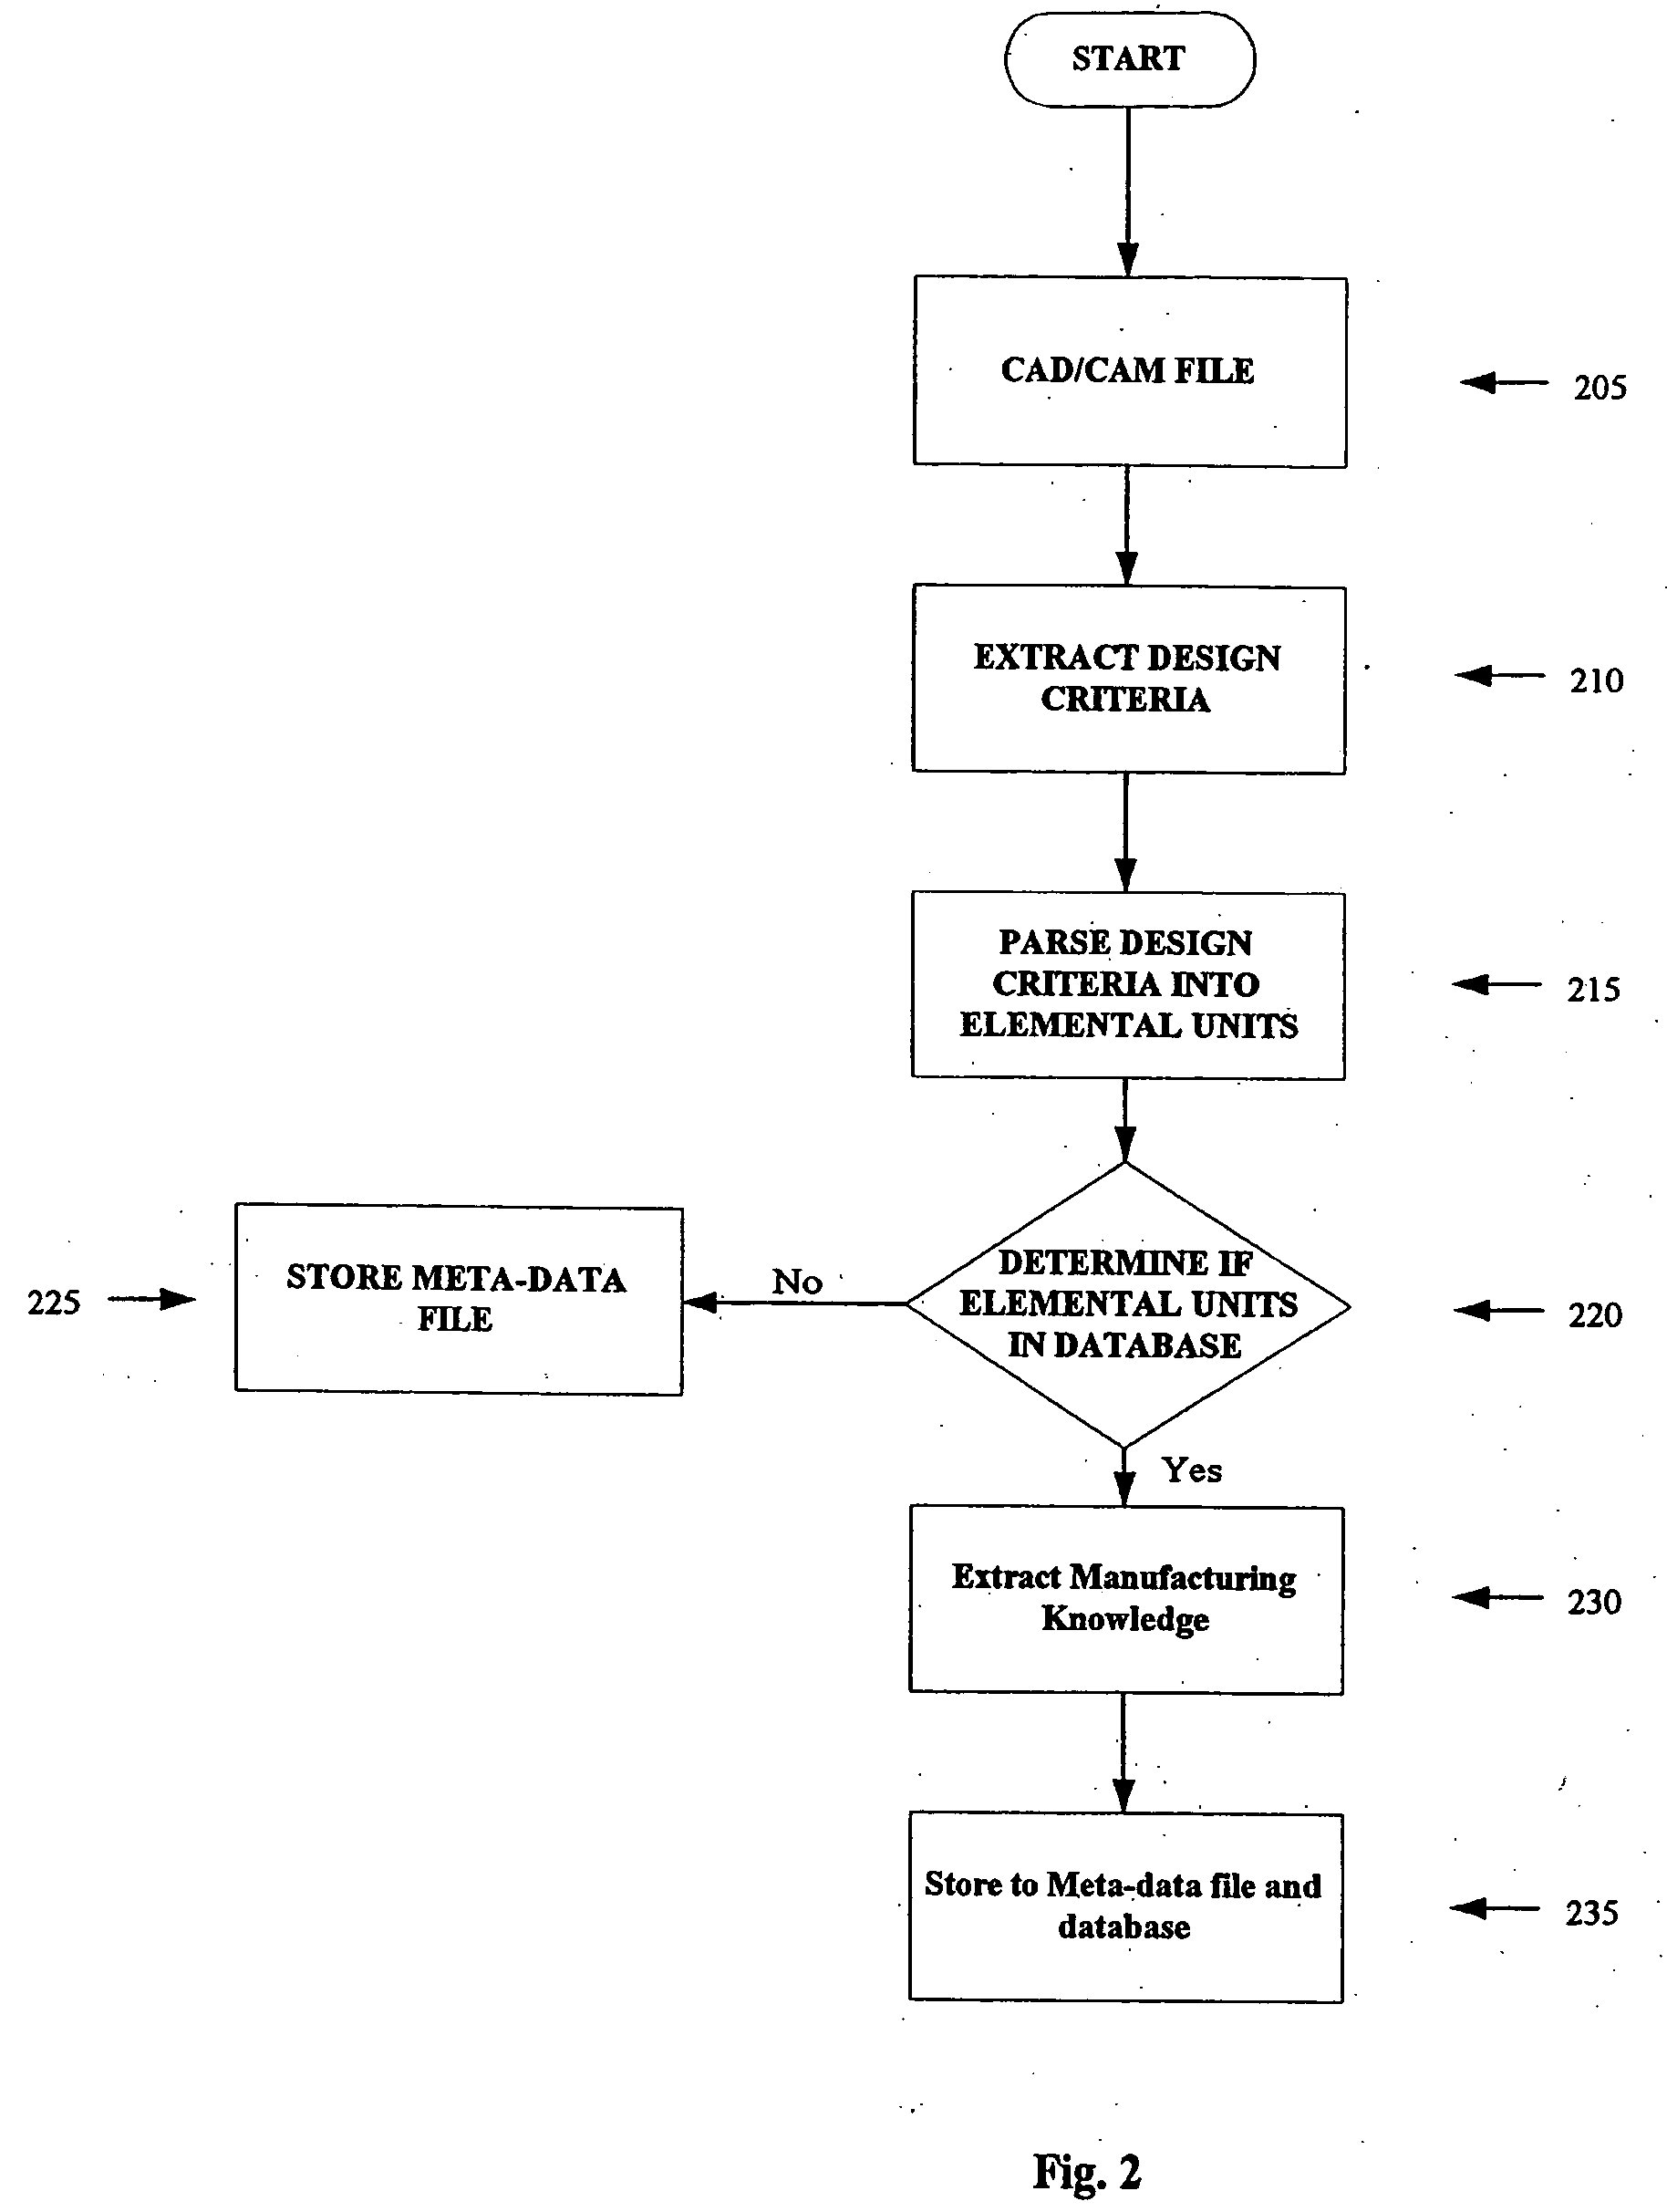 Method and system for capturing, managing and disseminating manufacturing knowledge